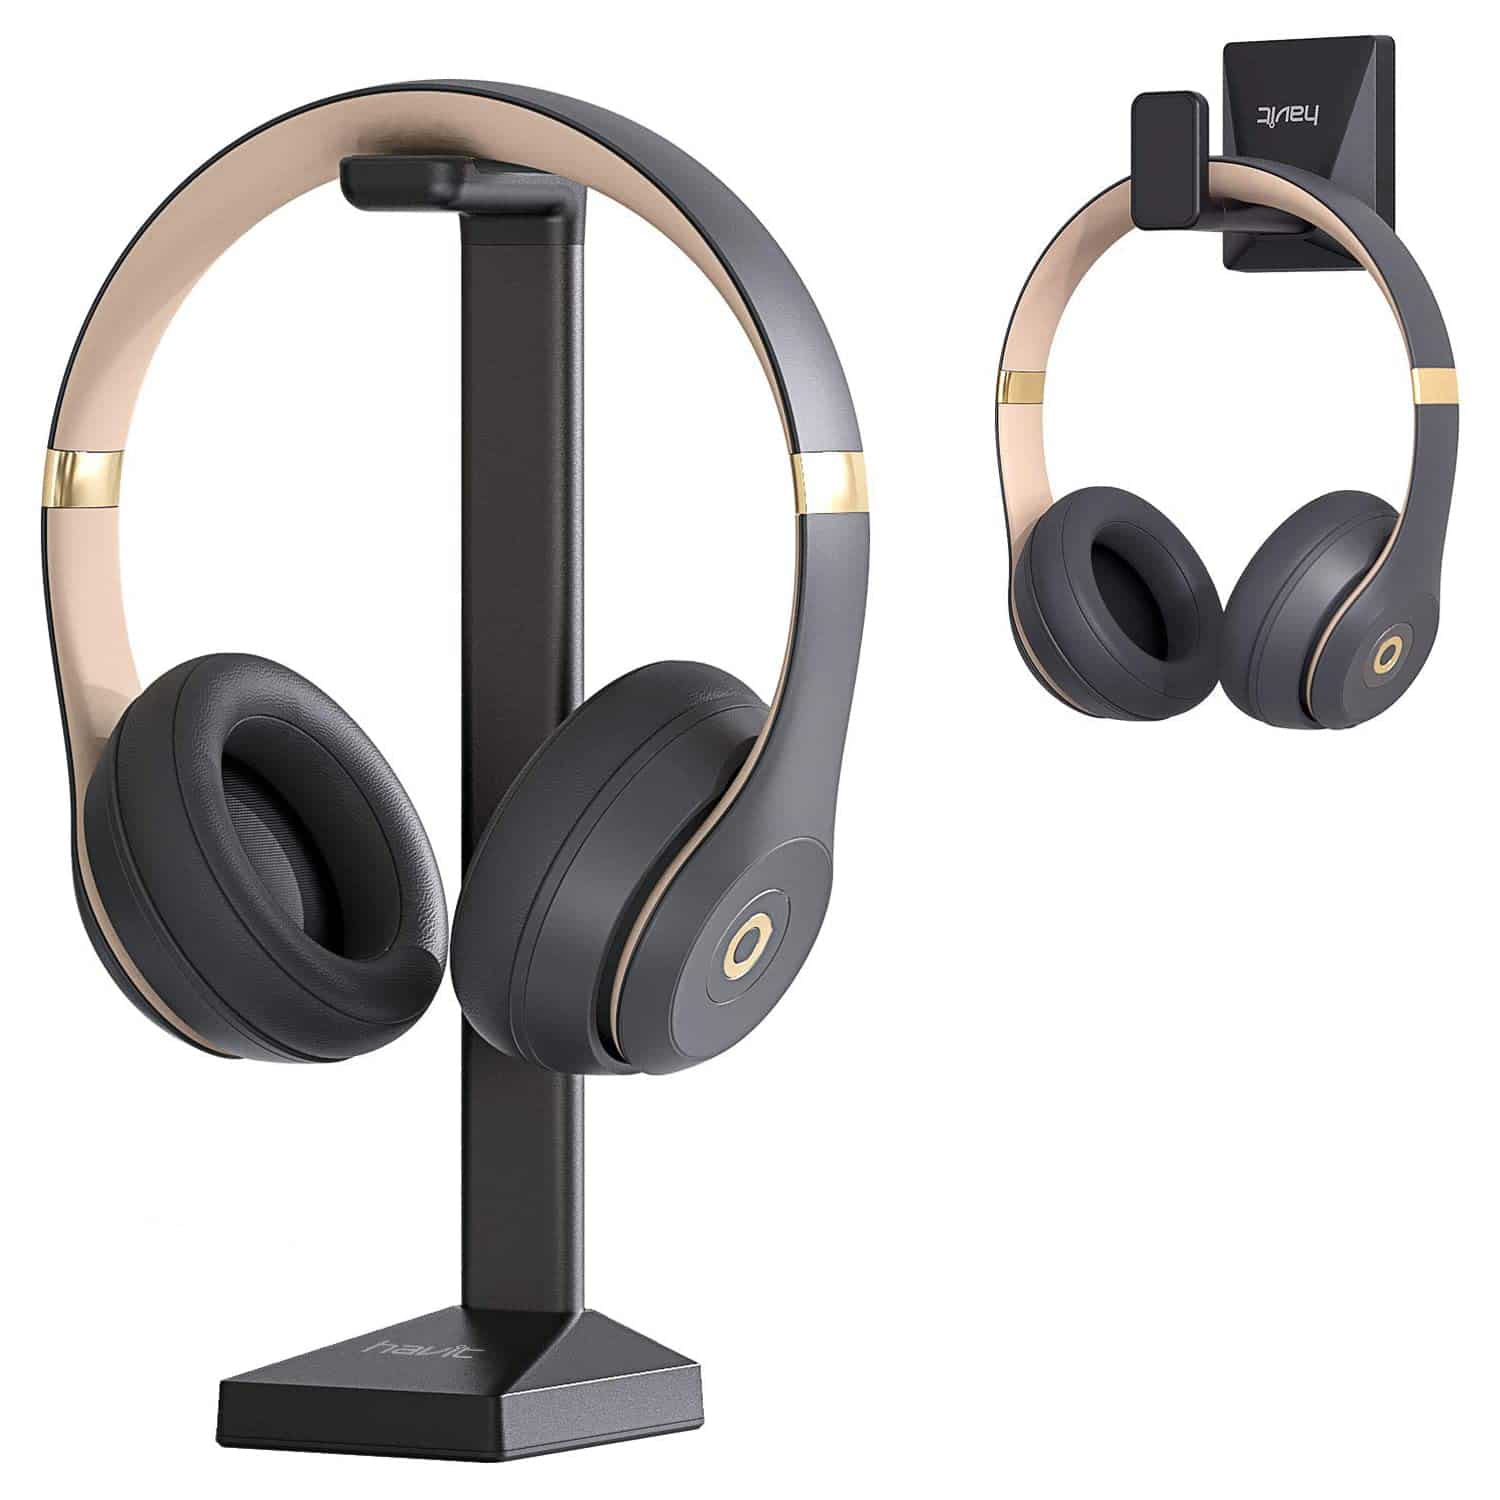 HAVIT TH670 Wall Mounted Headphone Stand with Replaceable Headset Hanger & Removable Base